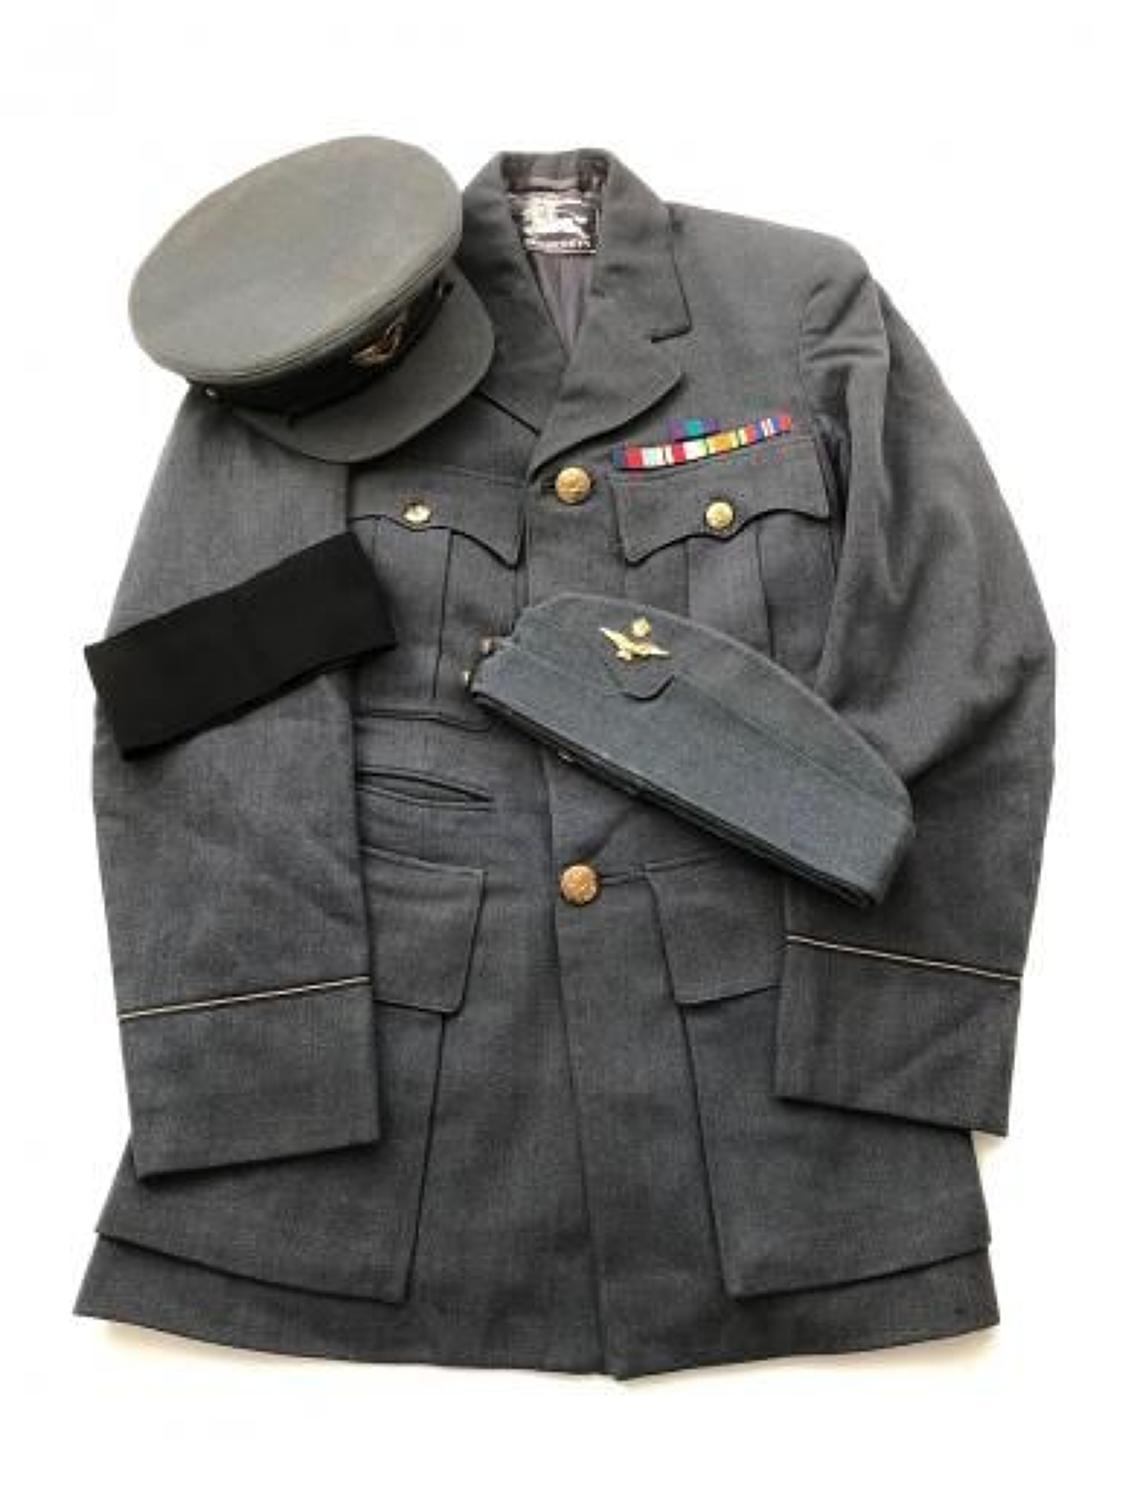 WW2 Pattern RAF Officer's Tunic & Caps Tailored by Burberrys Ltd.